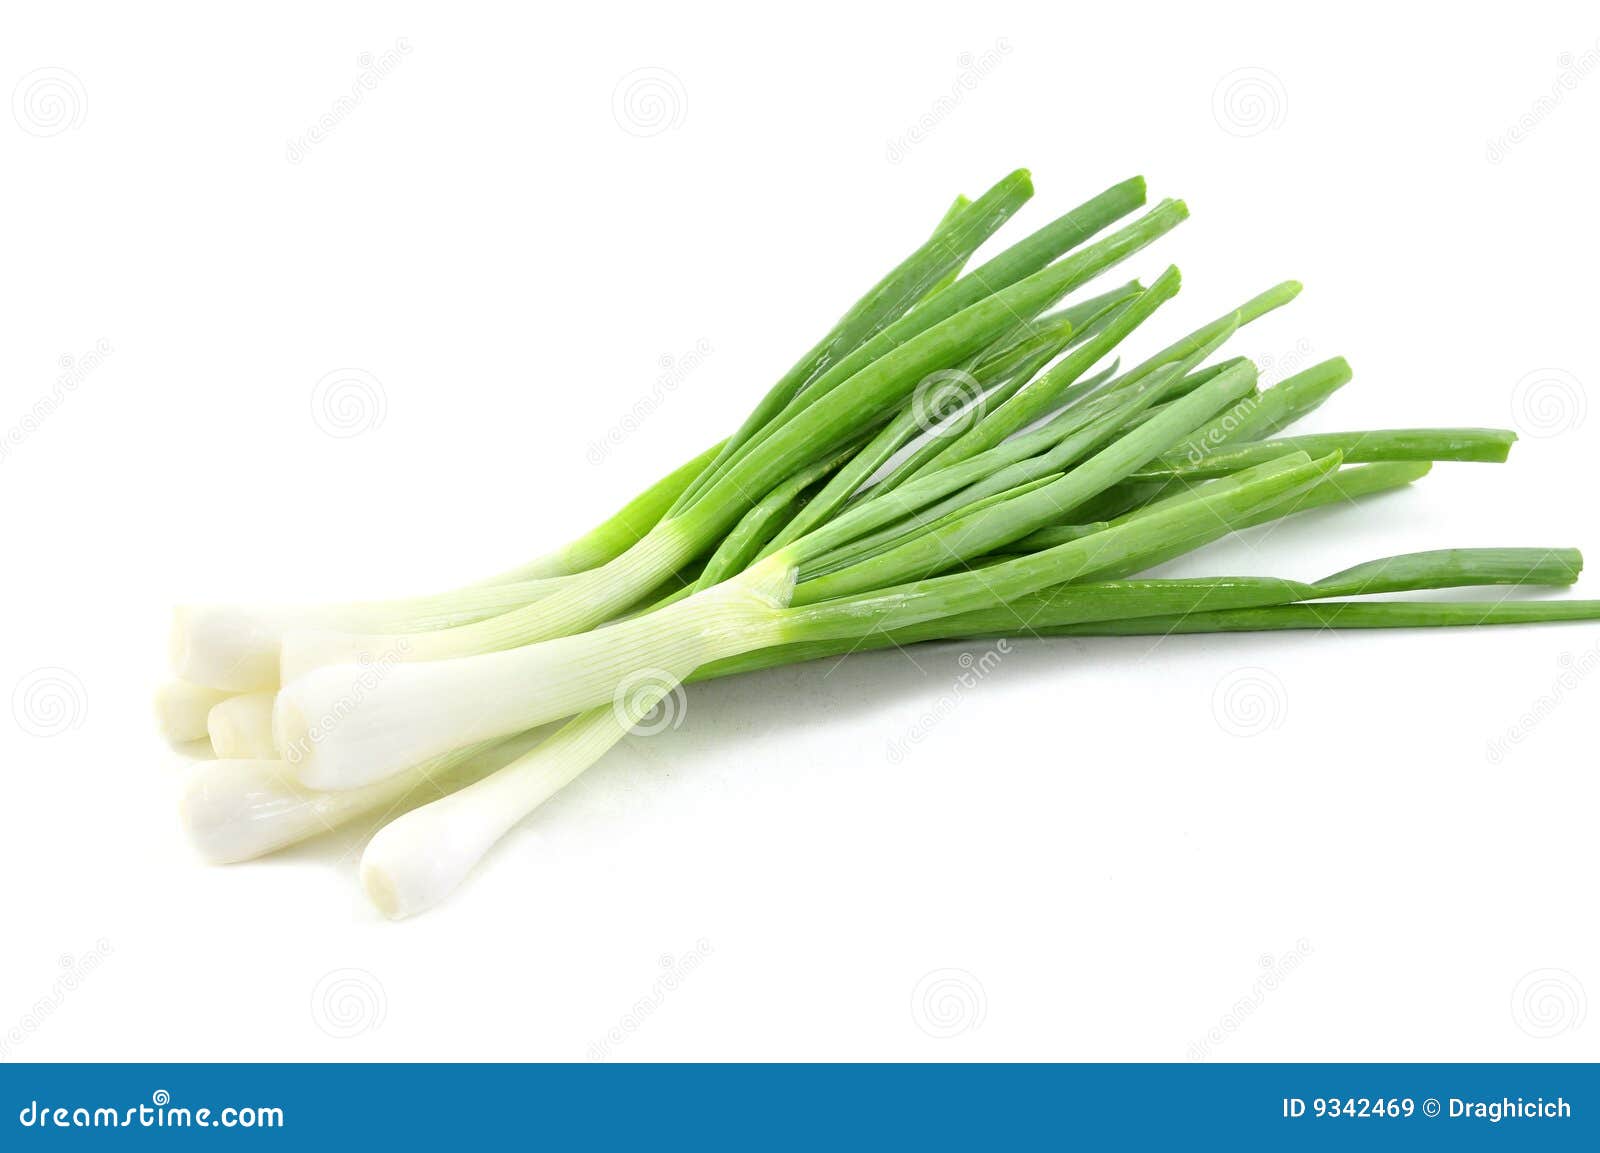 spring onion clipart - photo #44